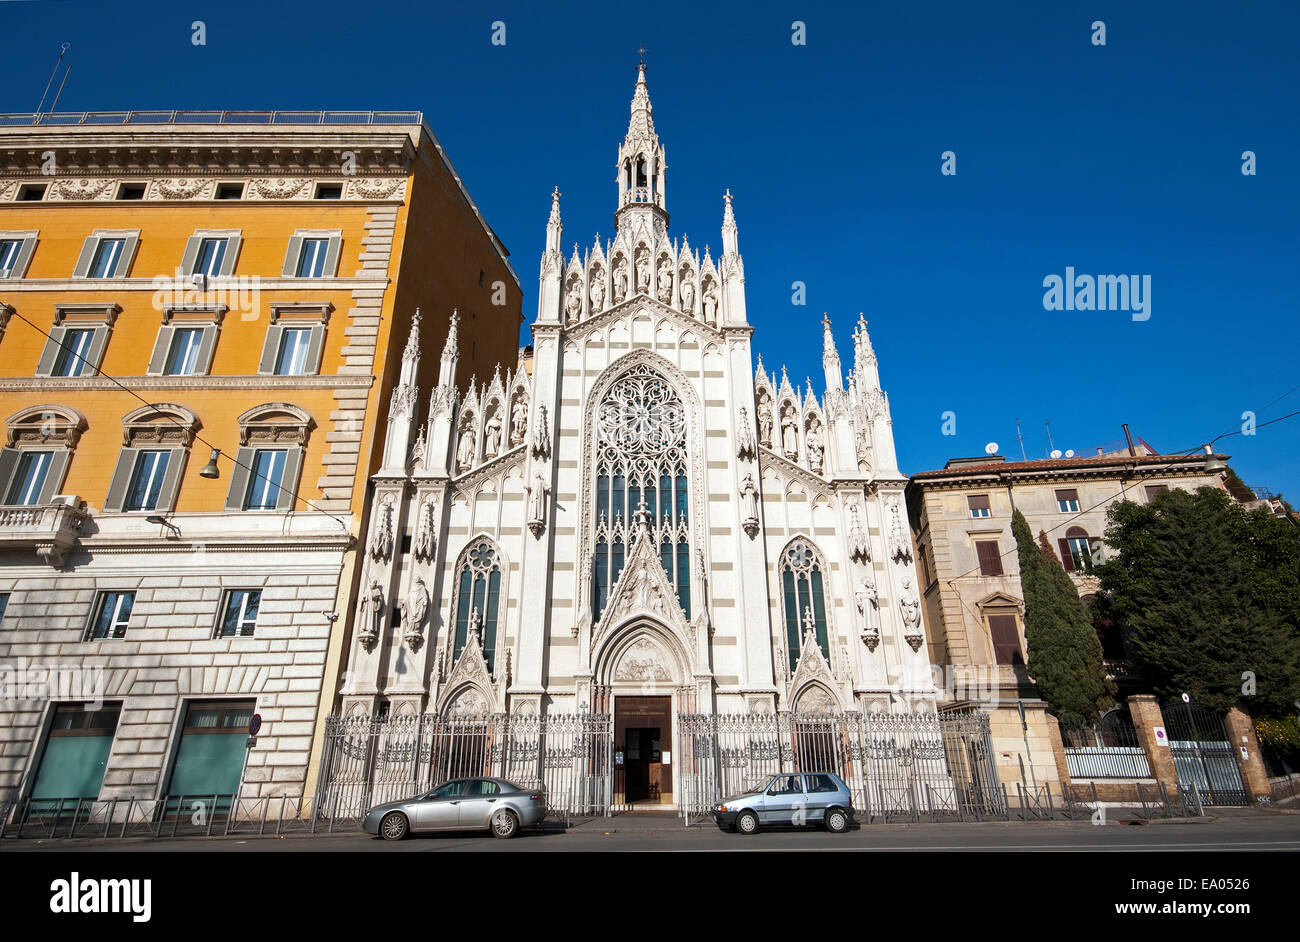 Church of Sacro Cuore del Suffragio (Sacred Heart of Suffrage, with inside the museum of the Holy Souls in Purgatory), Rome, Lazio, Italy Stock Photo